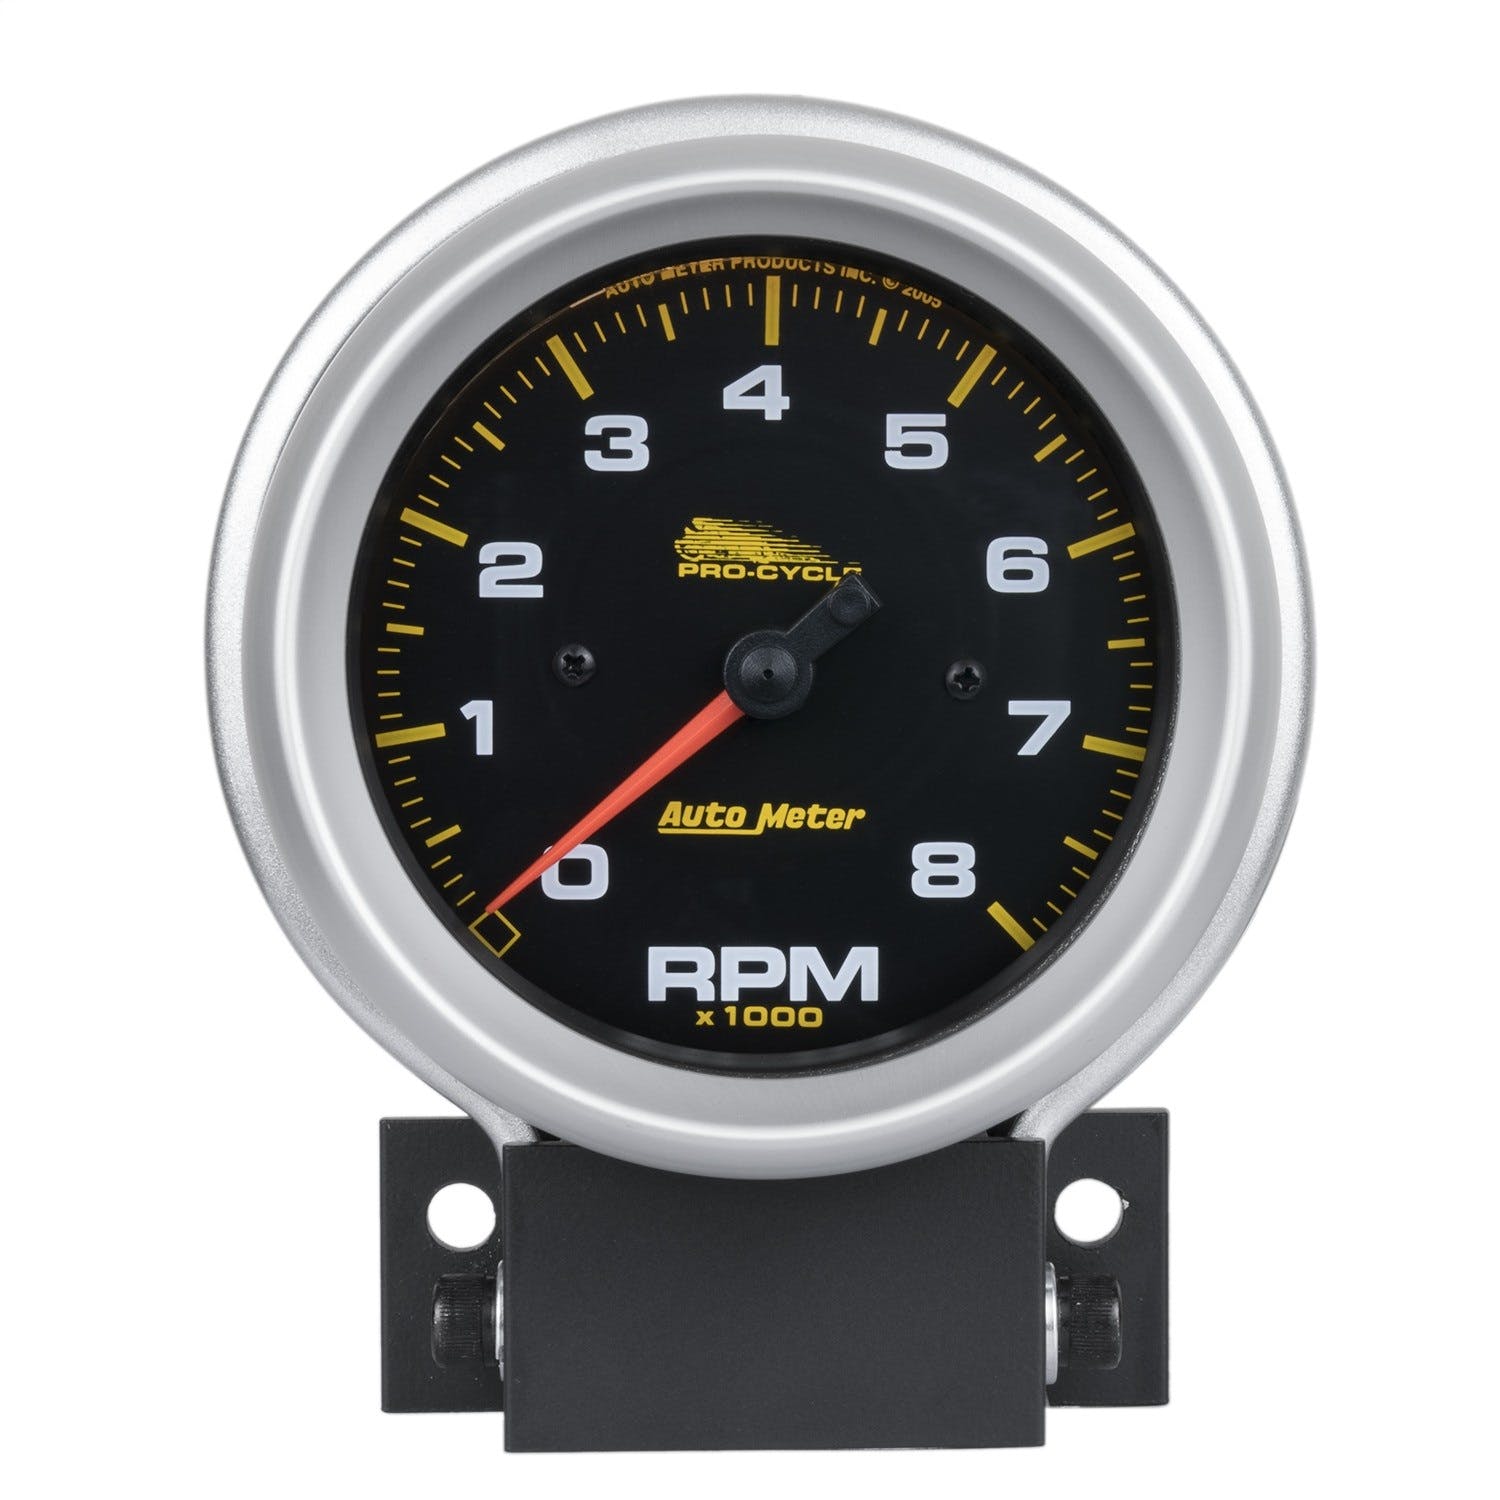 AutoMeter Products 19201 Tachometer Gauge, Back-Pro Cycle 3 3/4, 8K RPM, 2 and 4 Cylinder